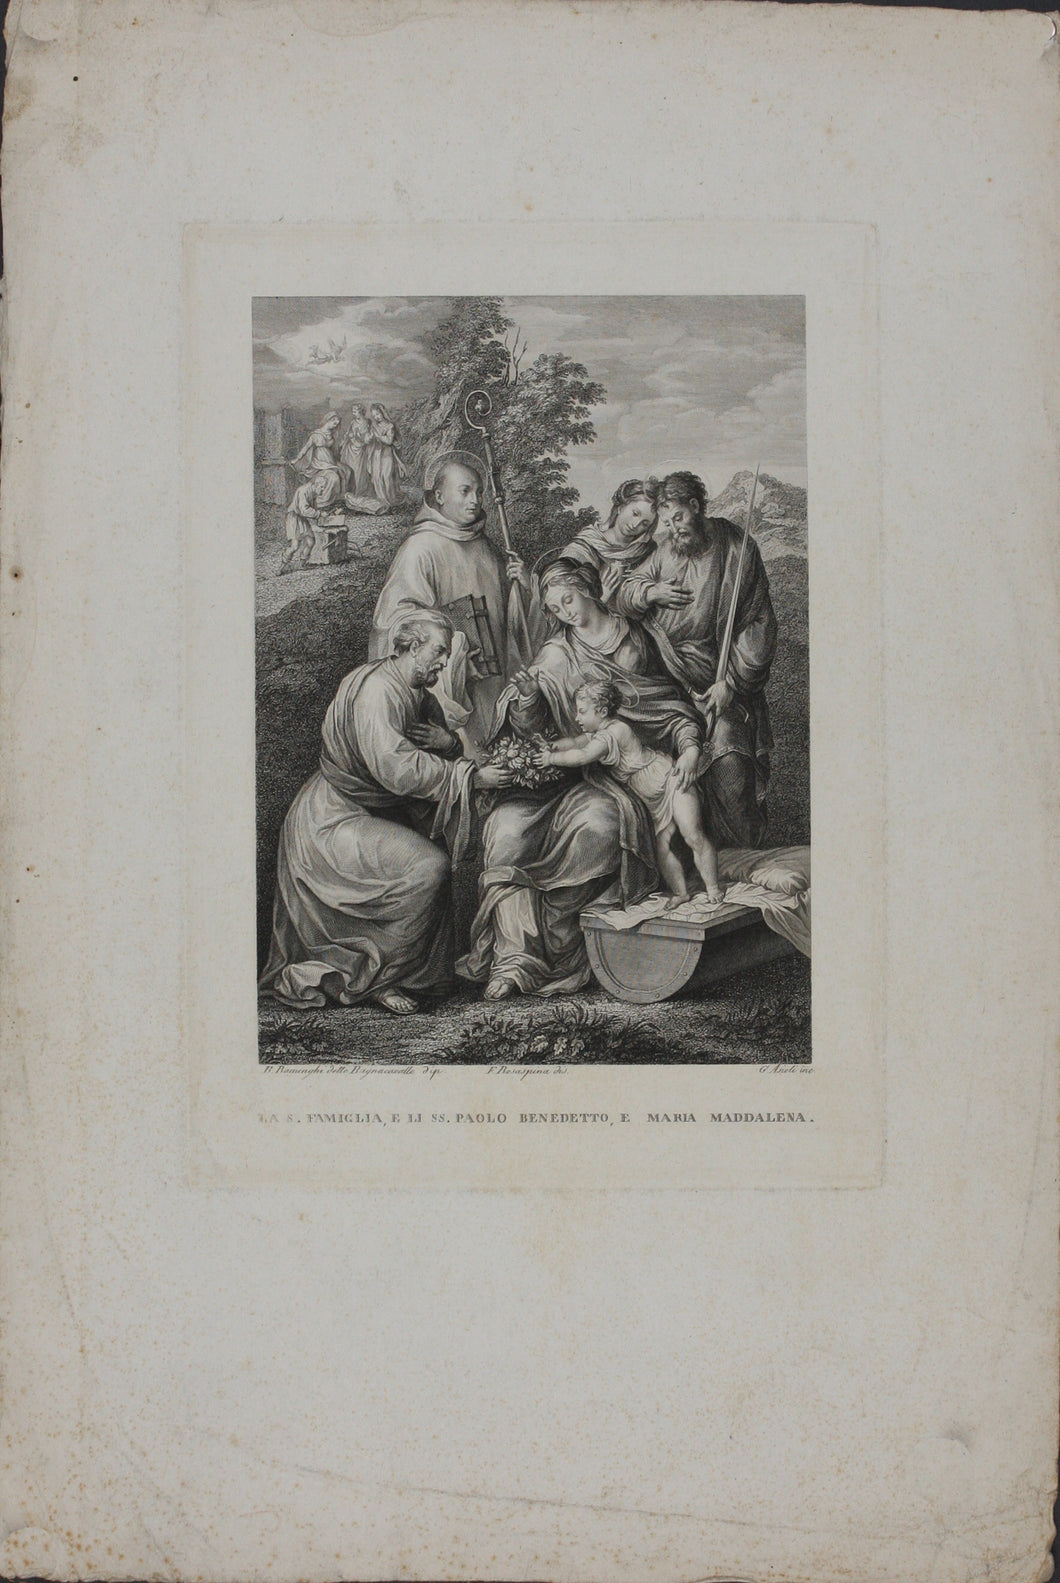 Bartolomeo Ramenghi, after. Francesco Rosaspina, after. Holy Family with Saints. Etching by Giuseppe Asioli. 1830.